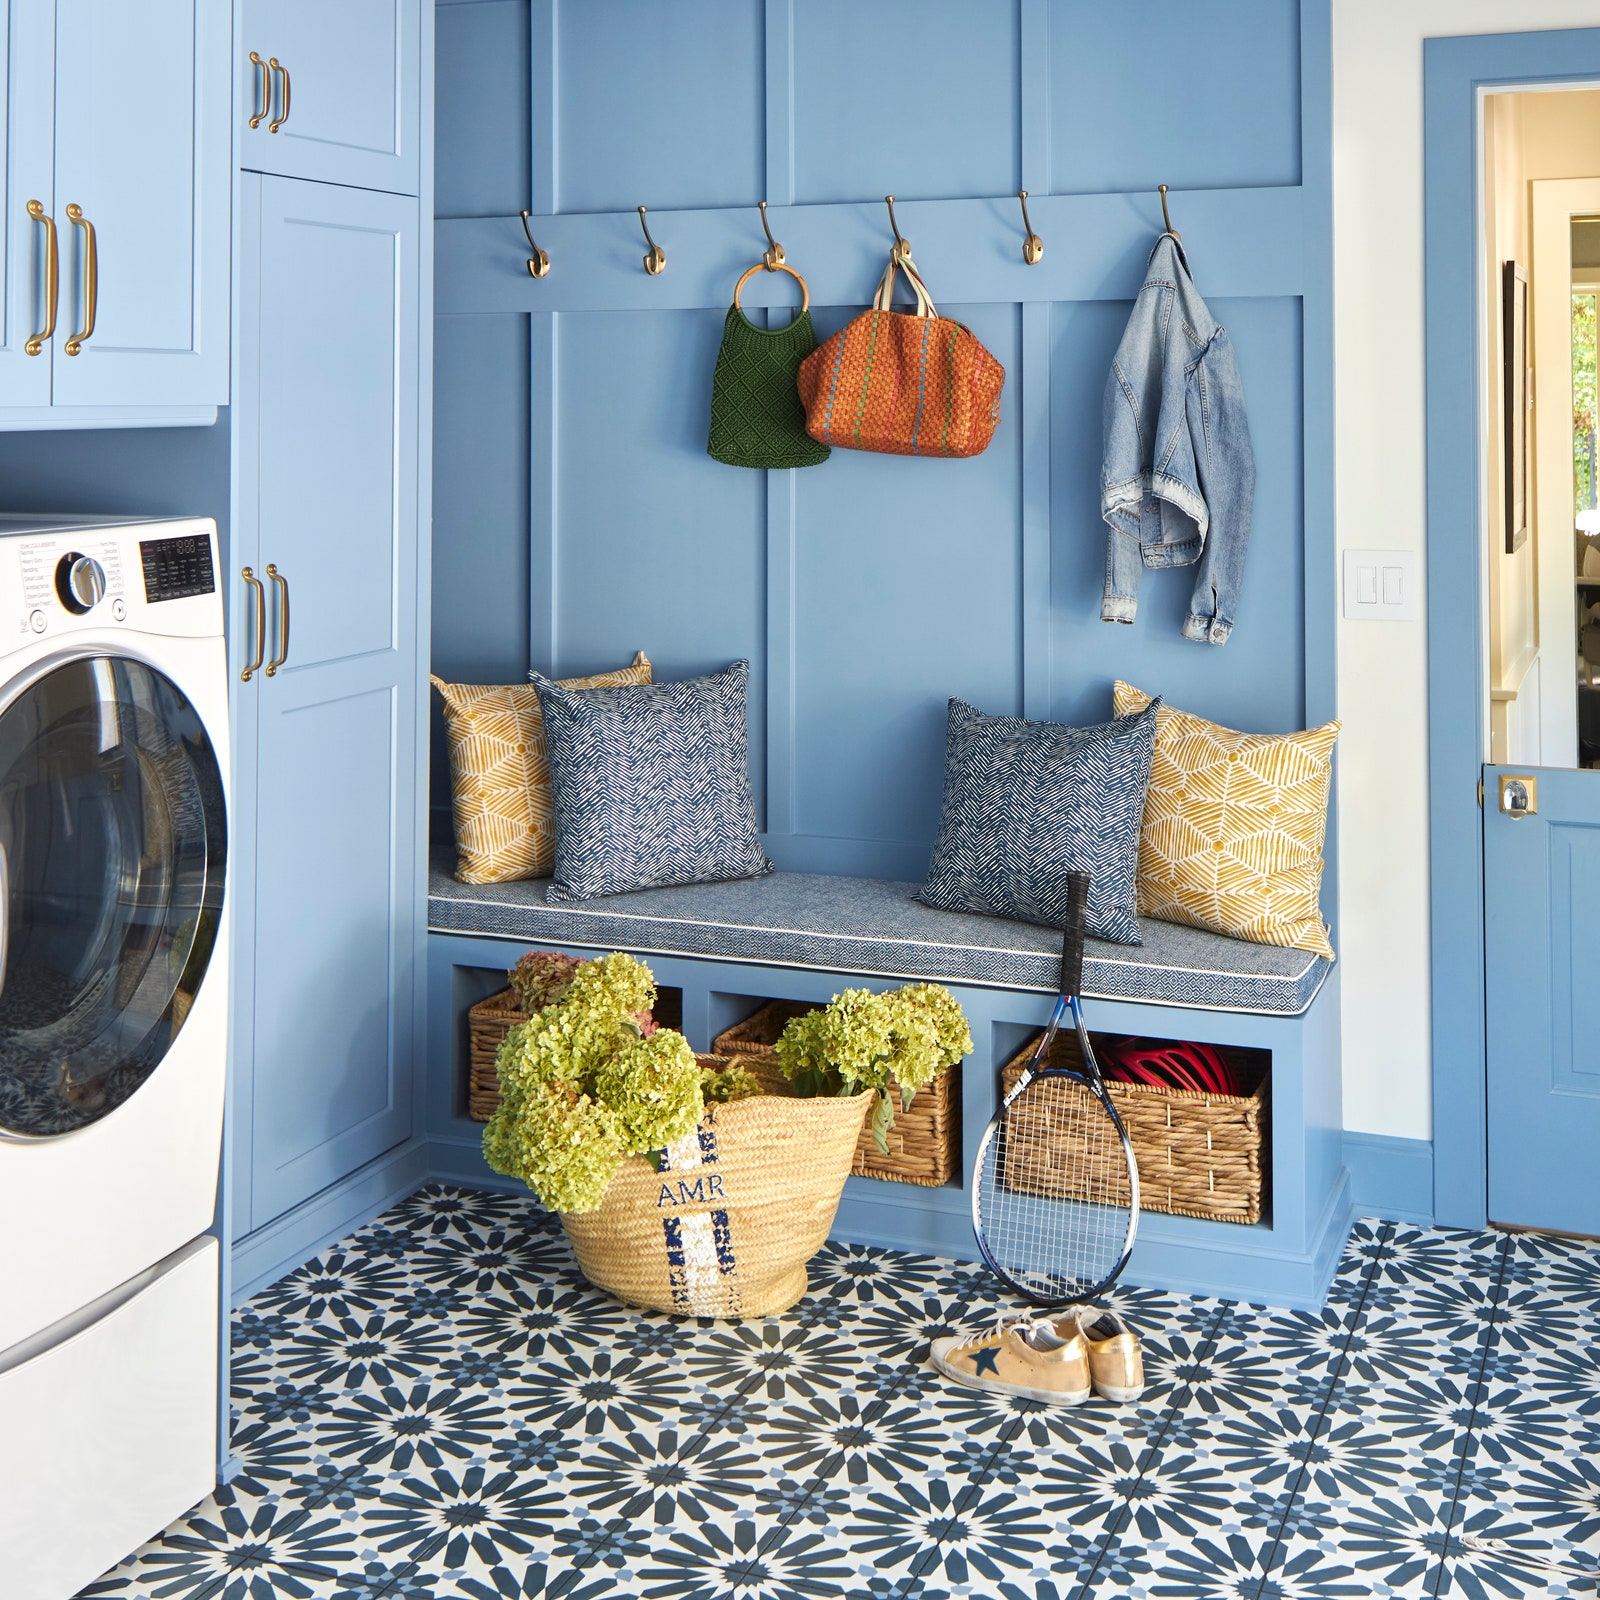 26 Small Laundry Room Ideas for the Tiniest of Apartments